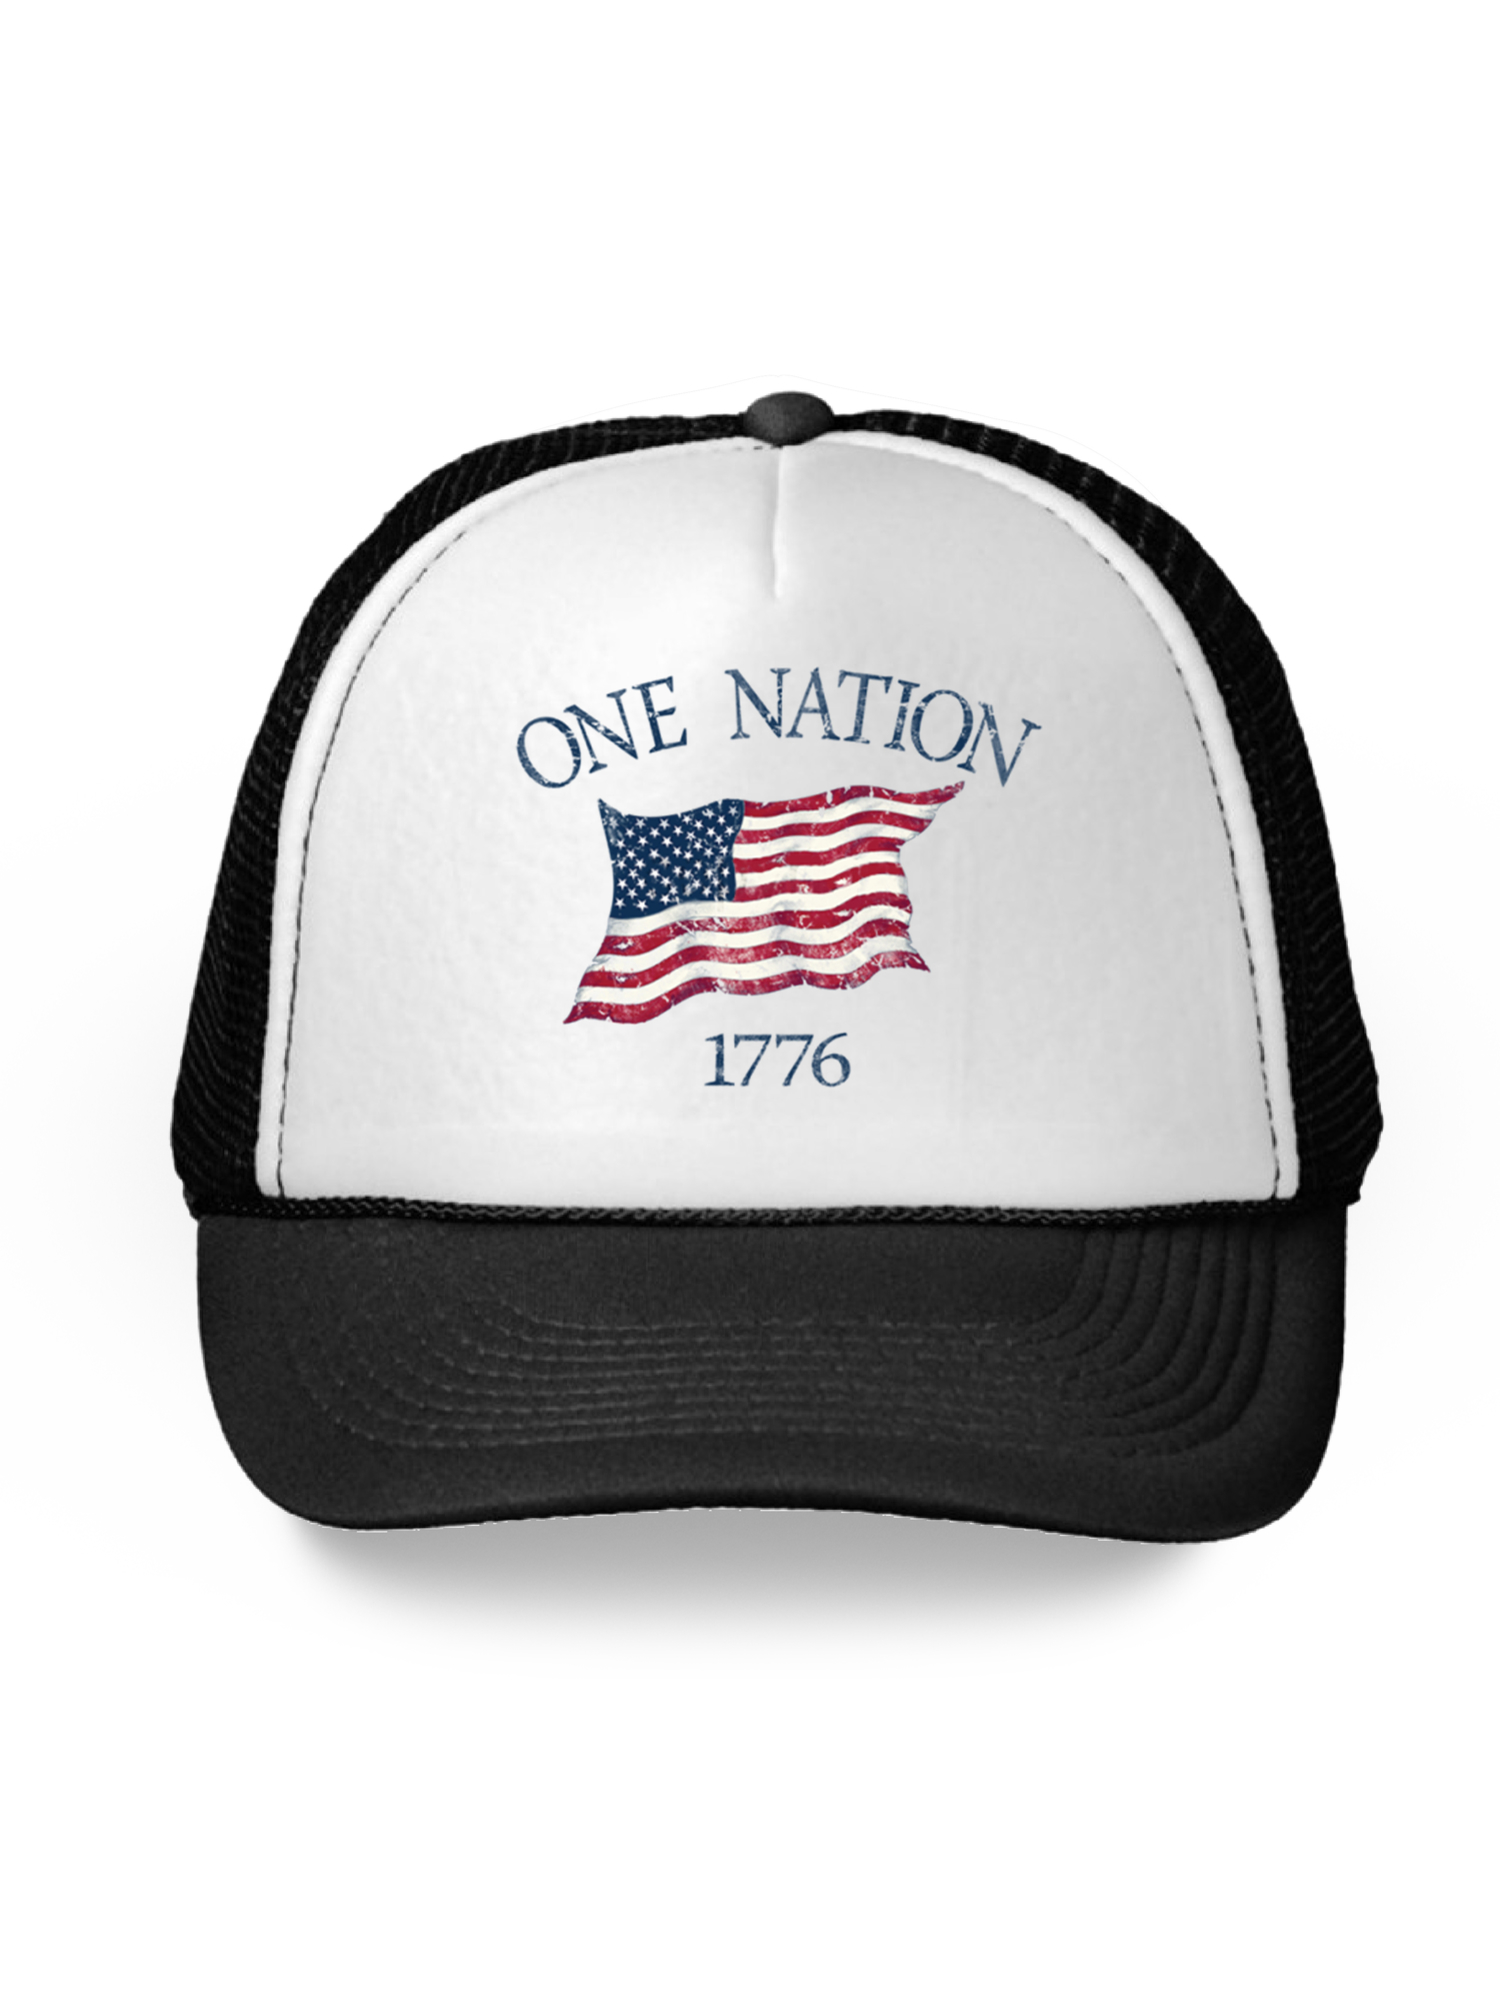 Awkward Styles USA Flag Hat American Trucker Hat One Nation 1776 Proud American Flag Hat USA Baseball Cap Patriotic Hat American Flag Men Women 4th of July Hat 4th of July Accessories - image 1 of 6